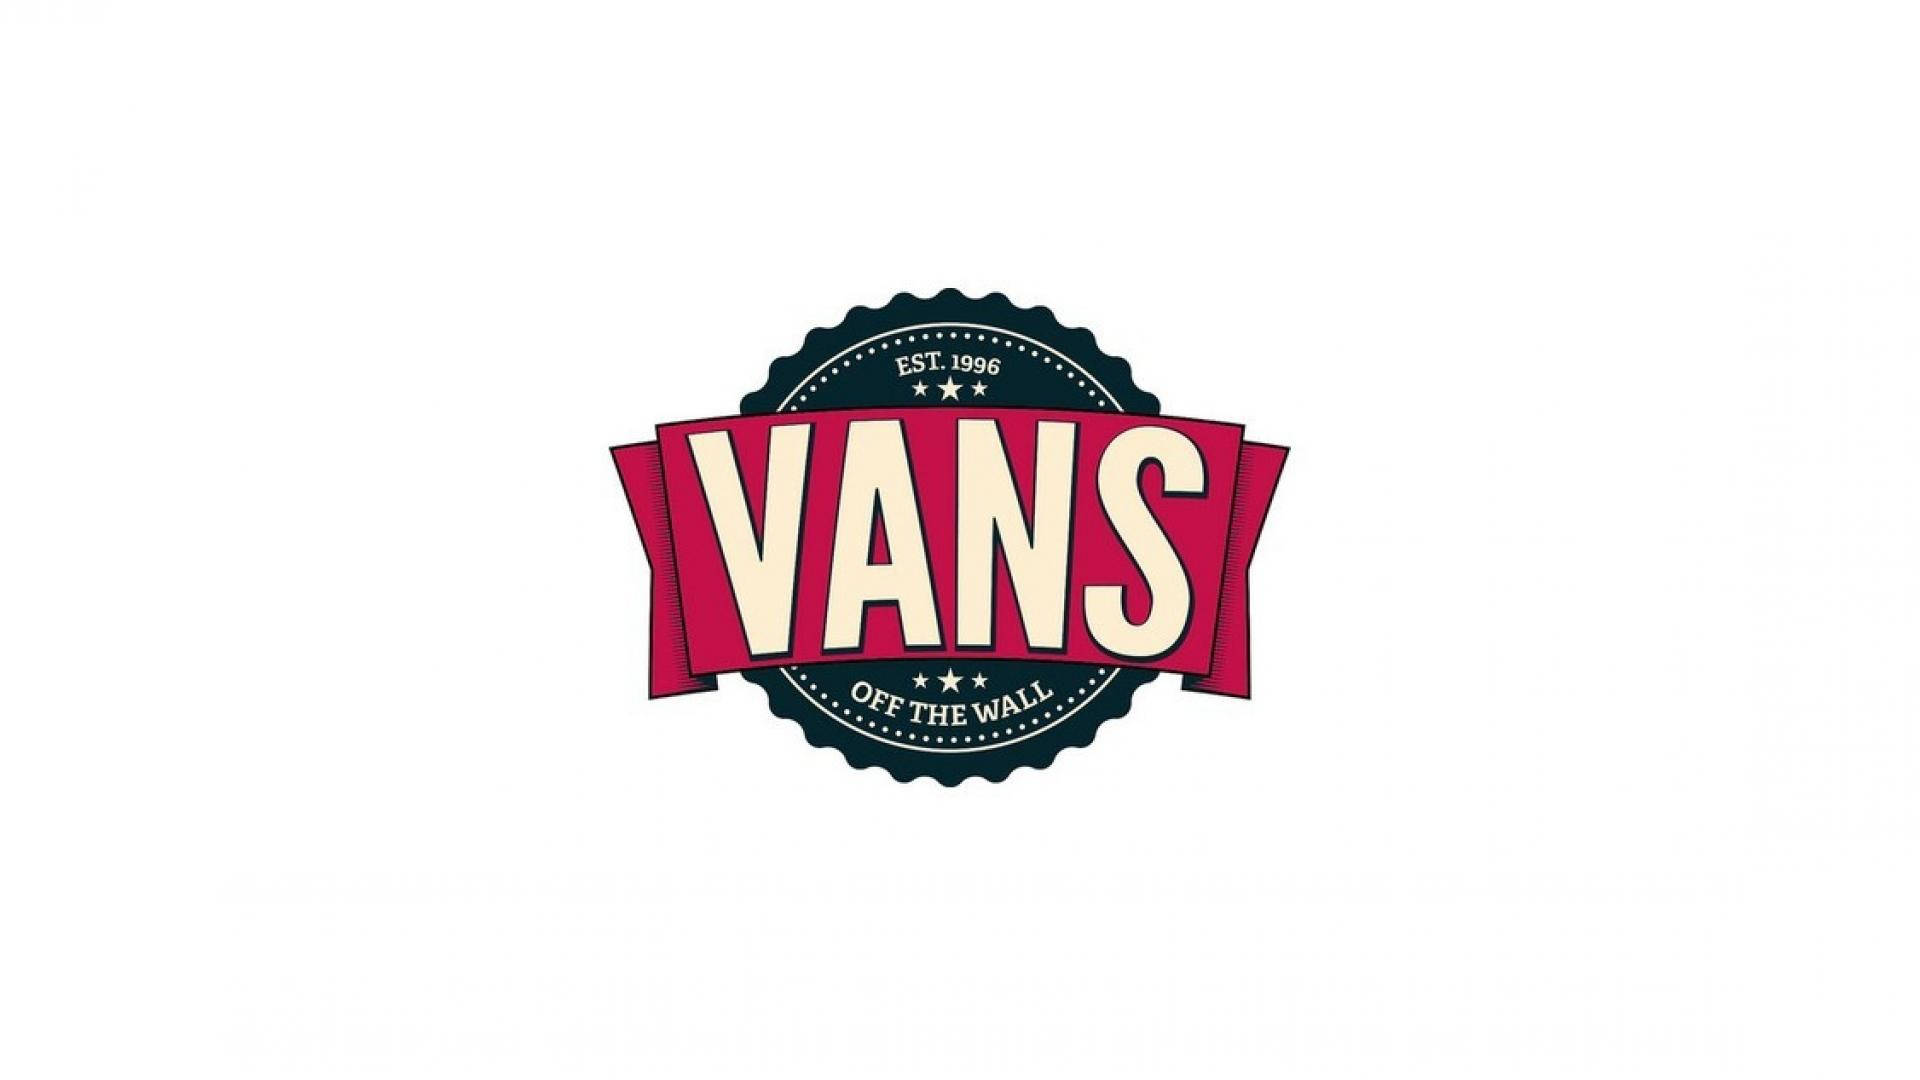 Vans Off The Wall Stamp Wallpaper